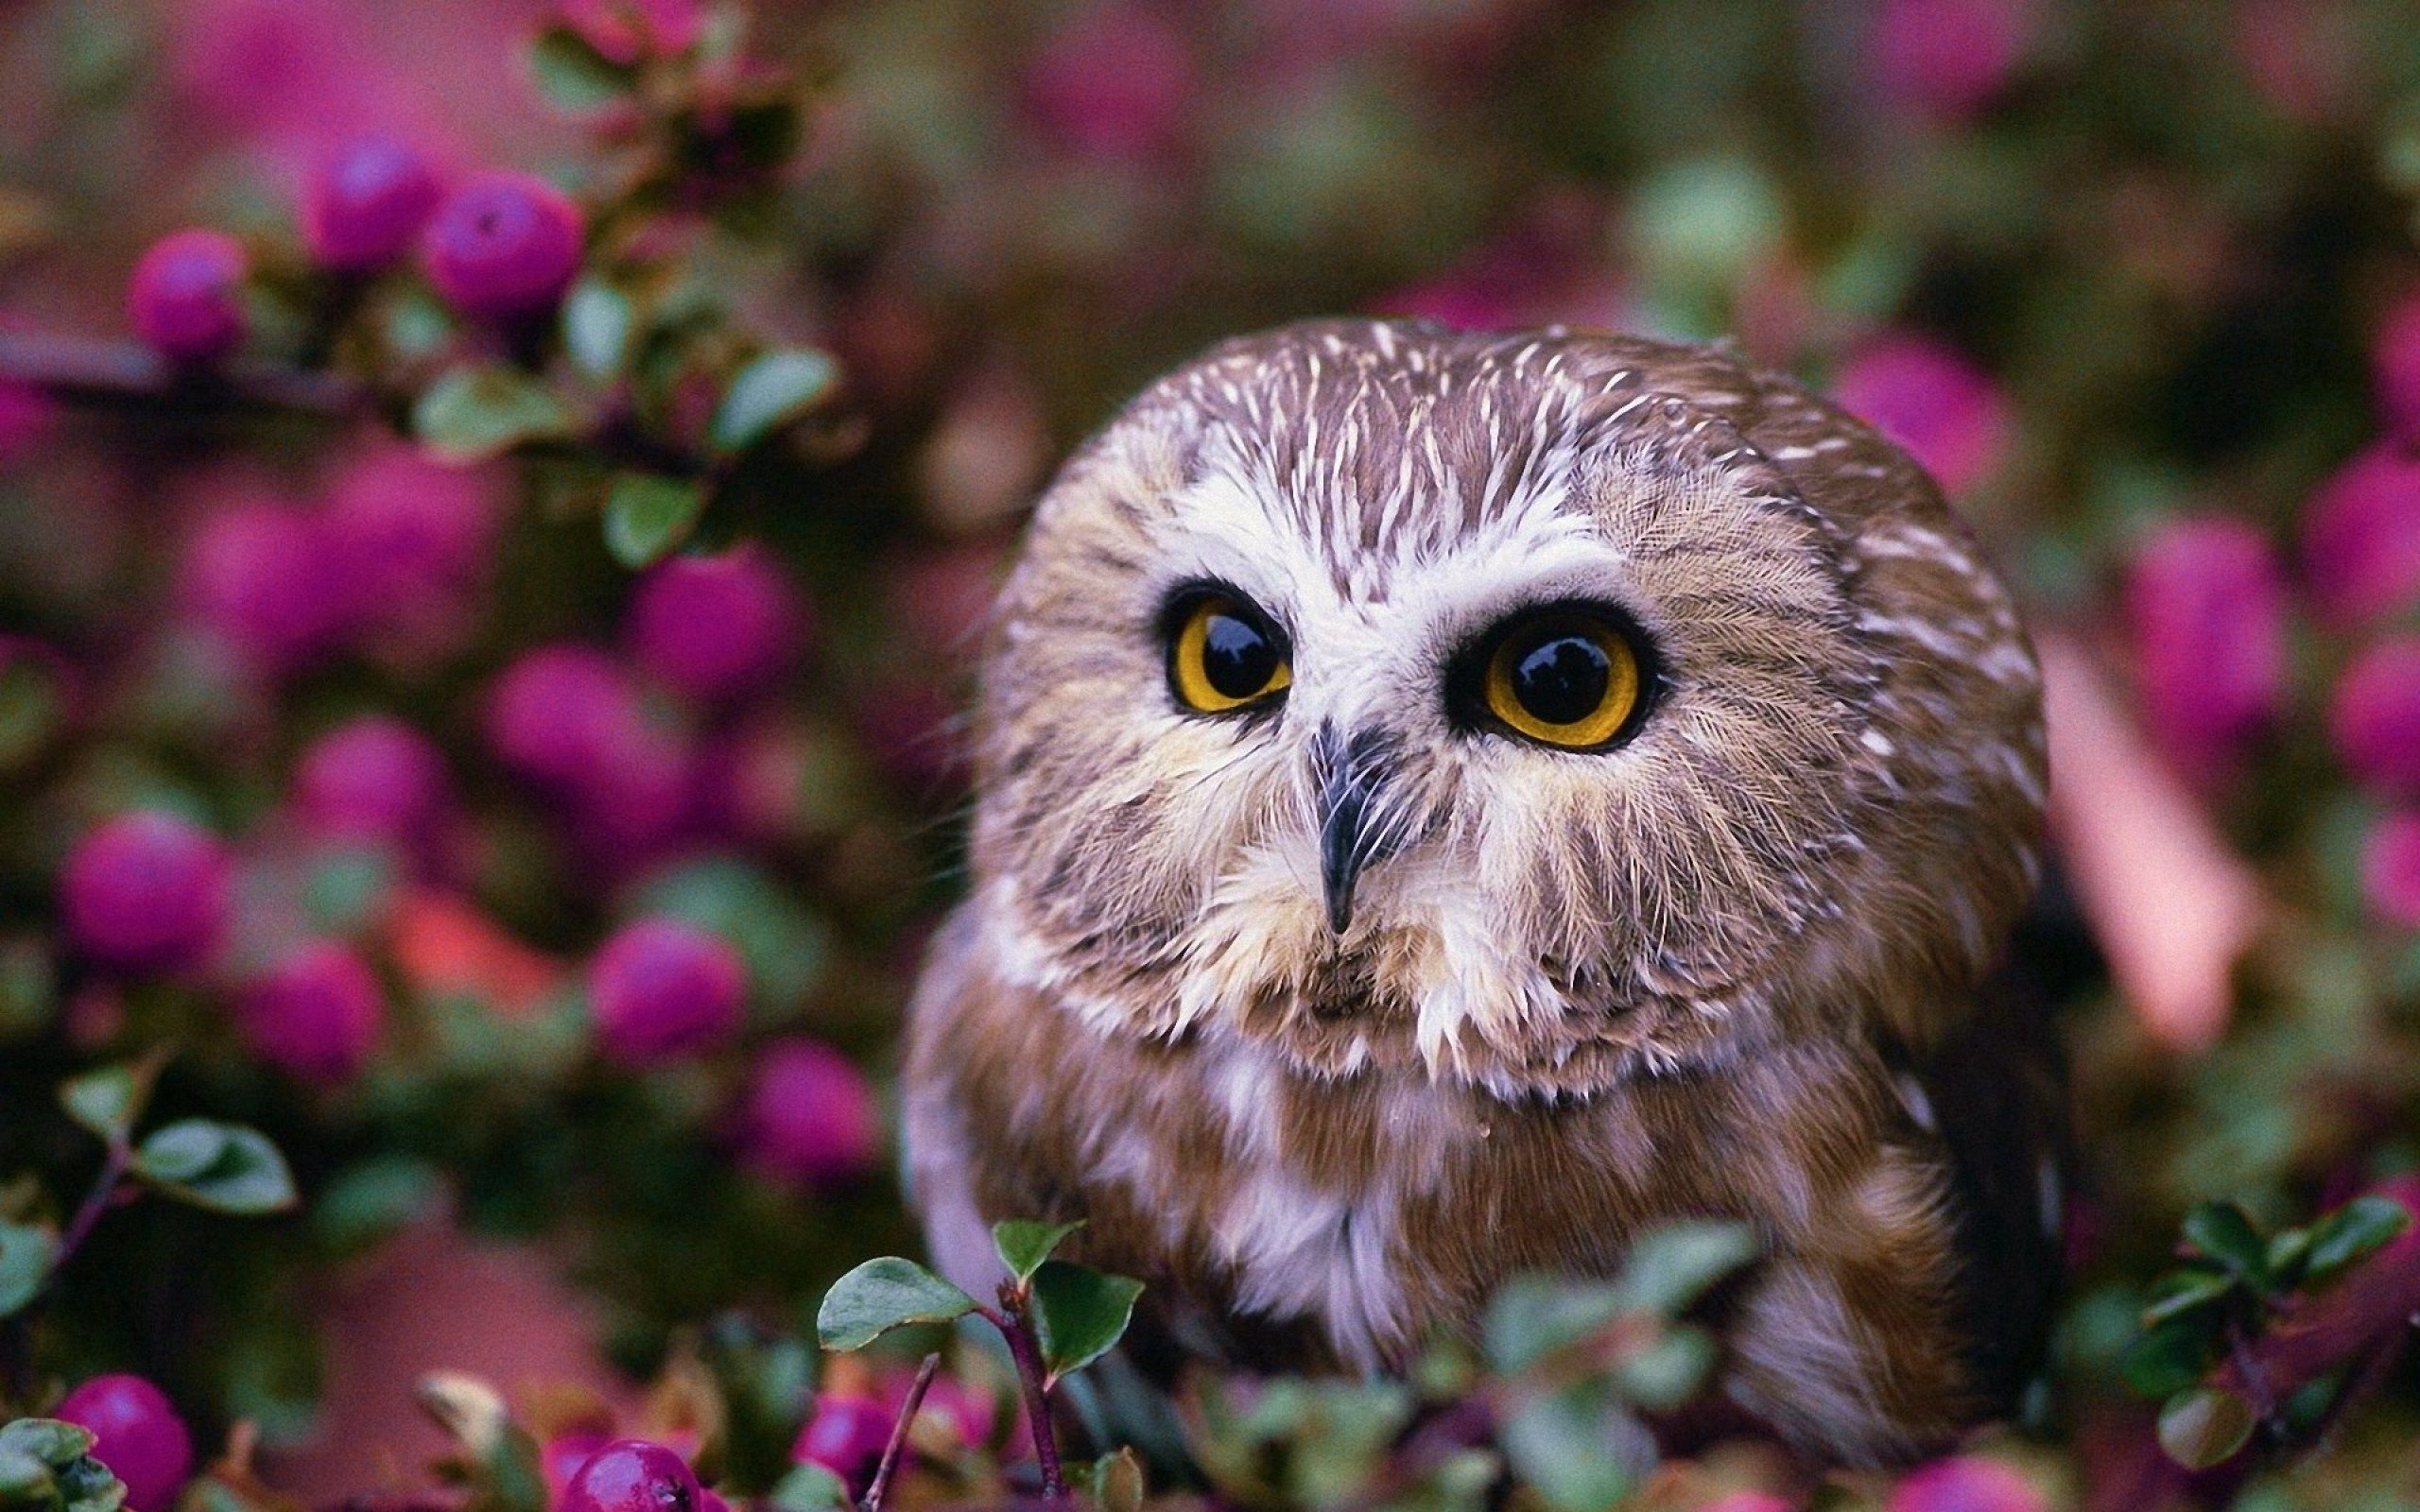 90921 download wallpaper flowers, animals, owl, wood, tree screensavers and pictures for free